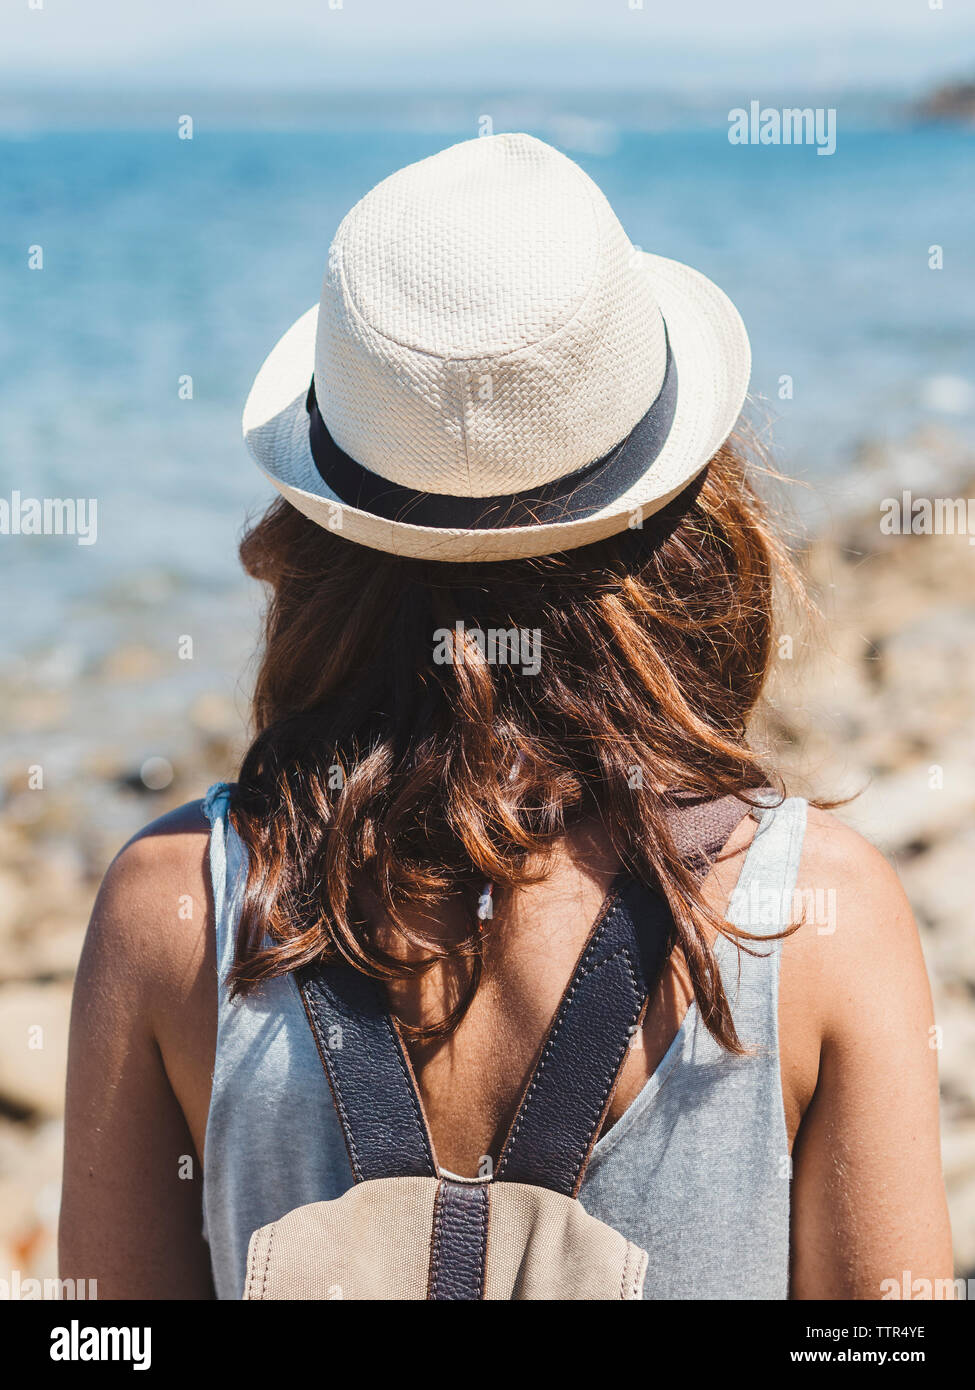 Rear view of woman with backpack looking at view while standing on rocky beach during sunny day Stock Photo